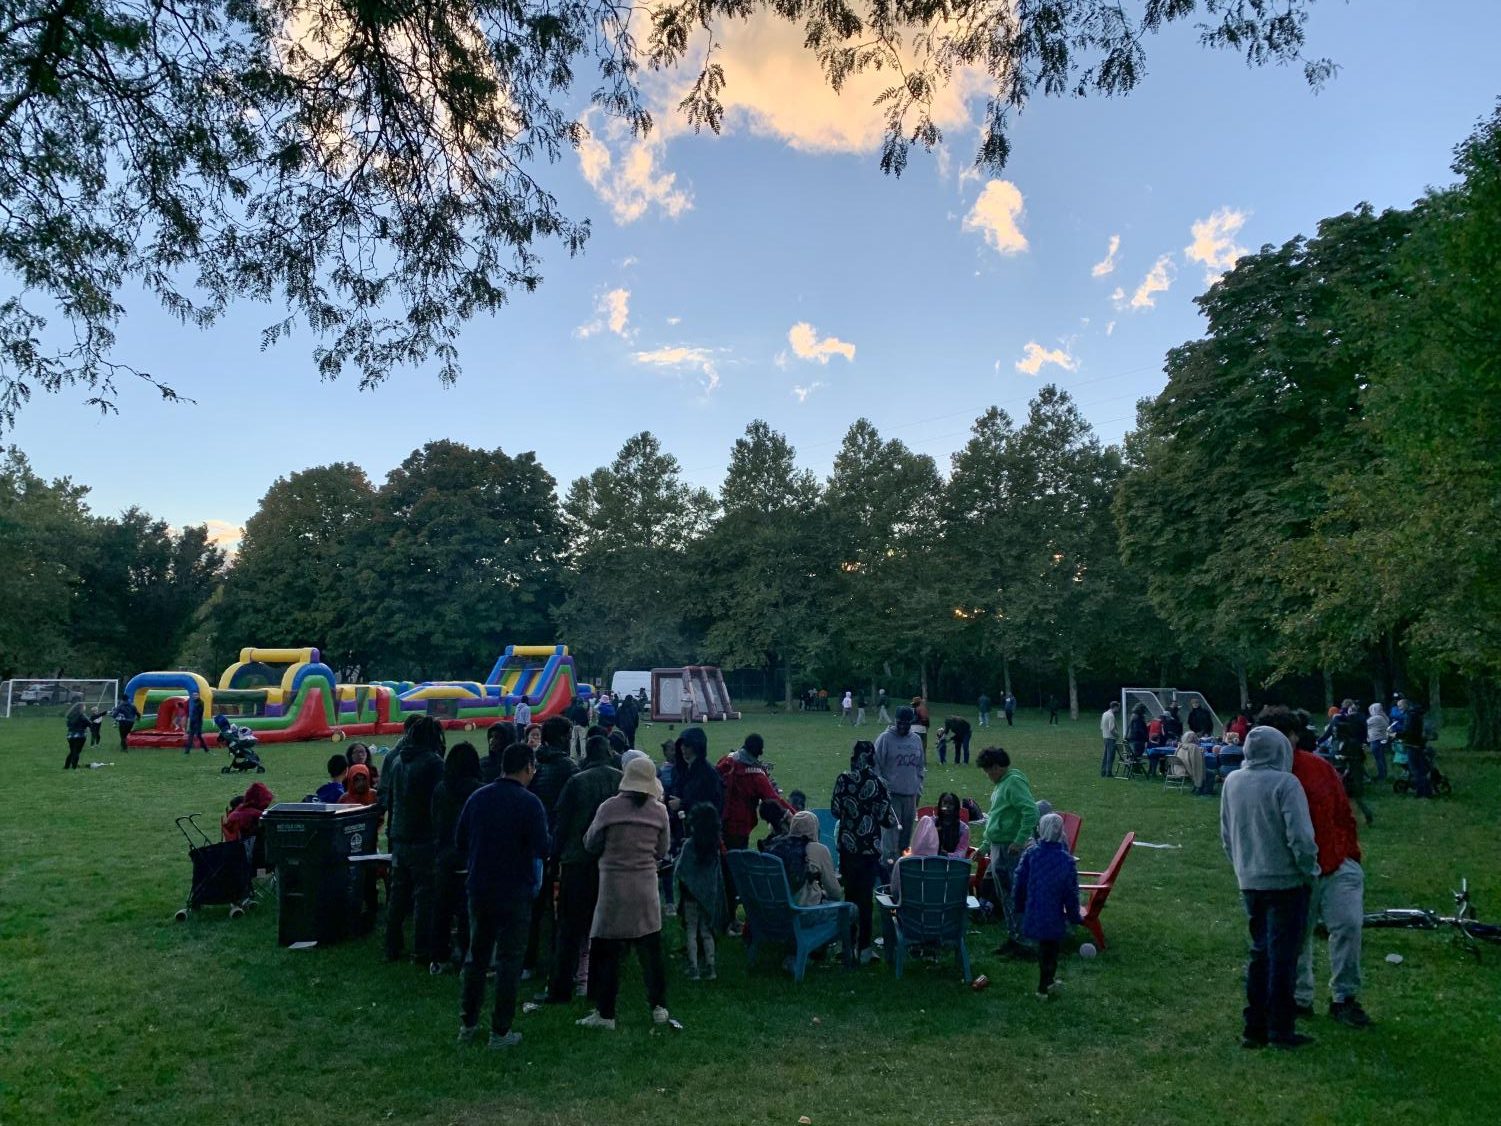 People+gather+around+picnic+tables+in+front+of+bouncy+castles+at+sunset.+They+are+in+a+grassy+park+surrounded+by+trees.